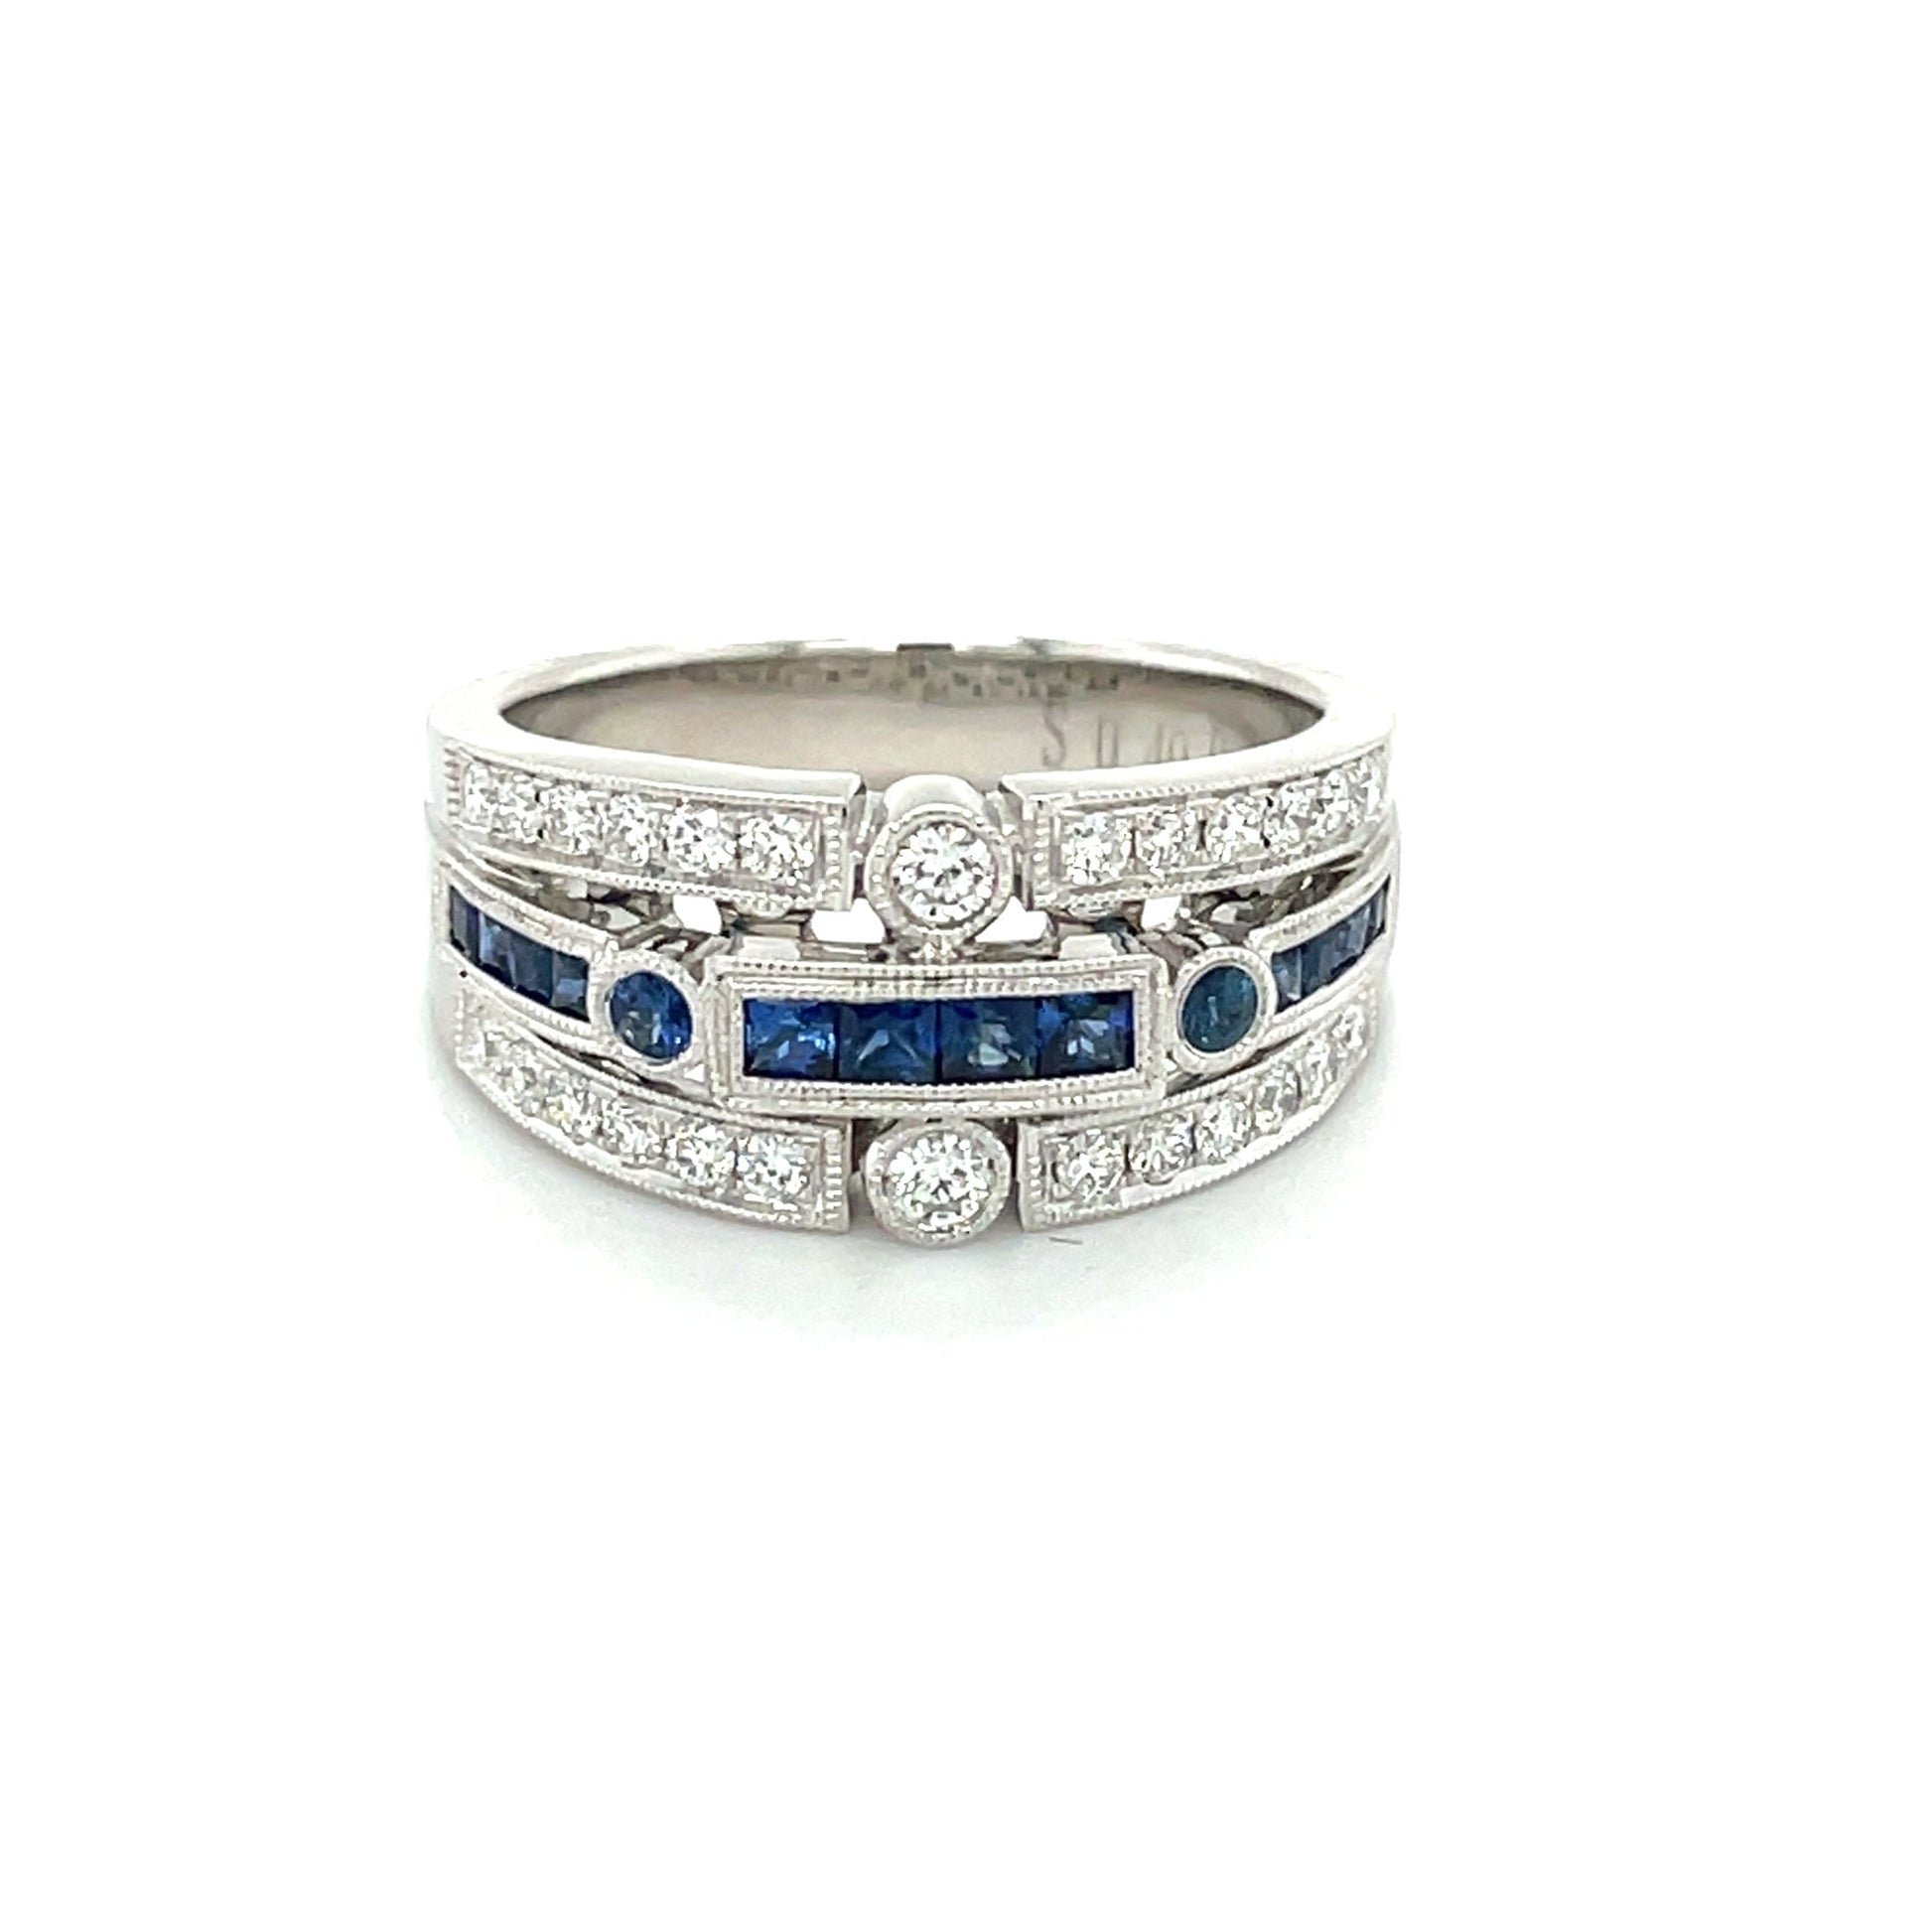 18k white gold ring with diamonds and blue sapphires, unique wedding band, white gold ring